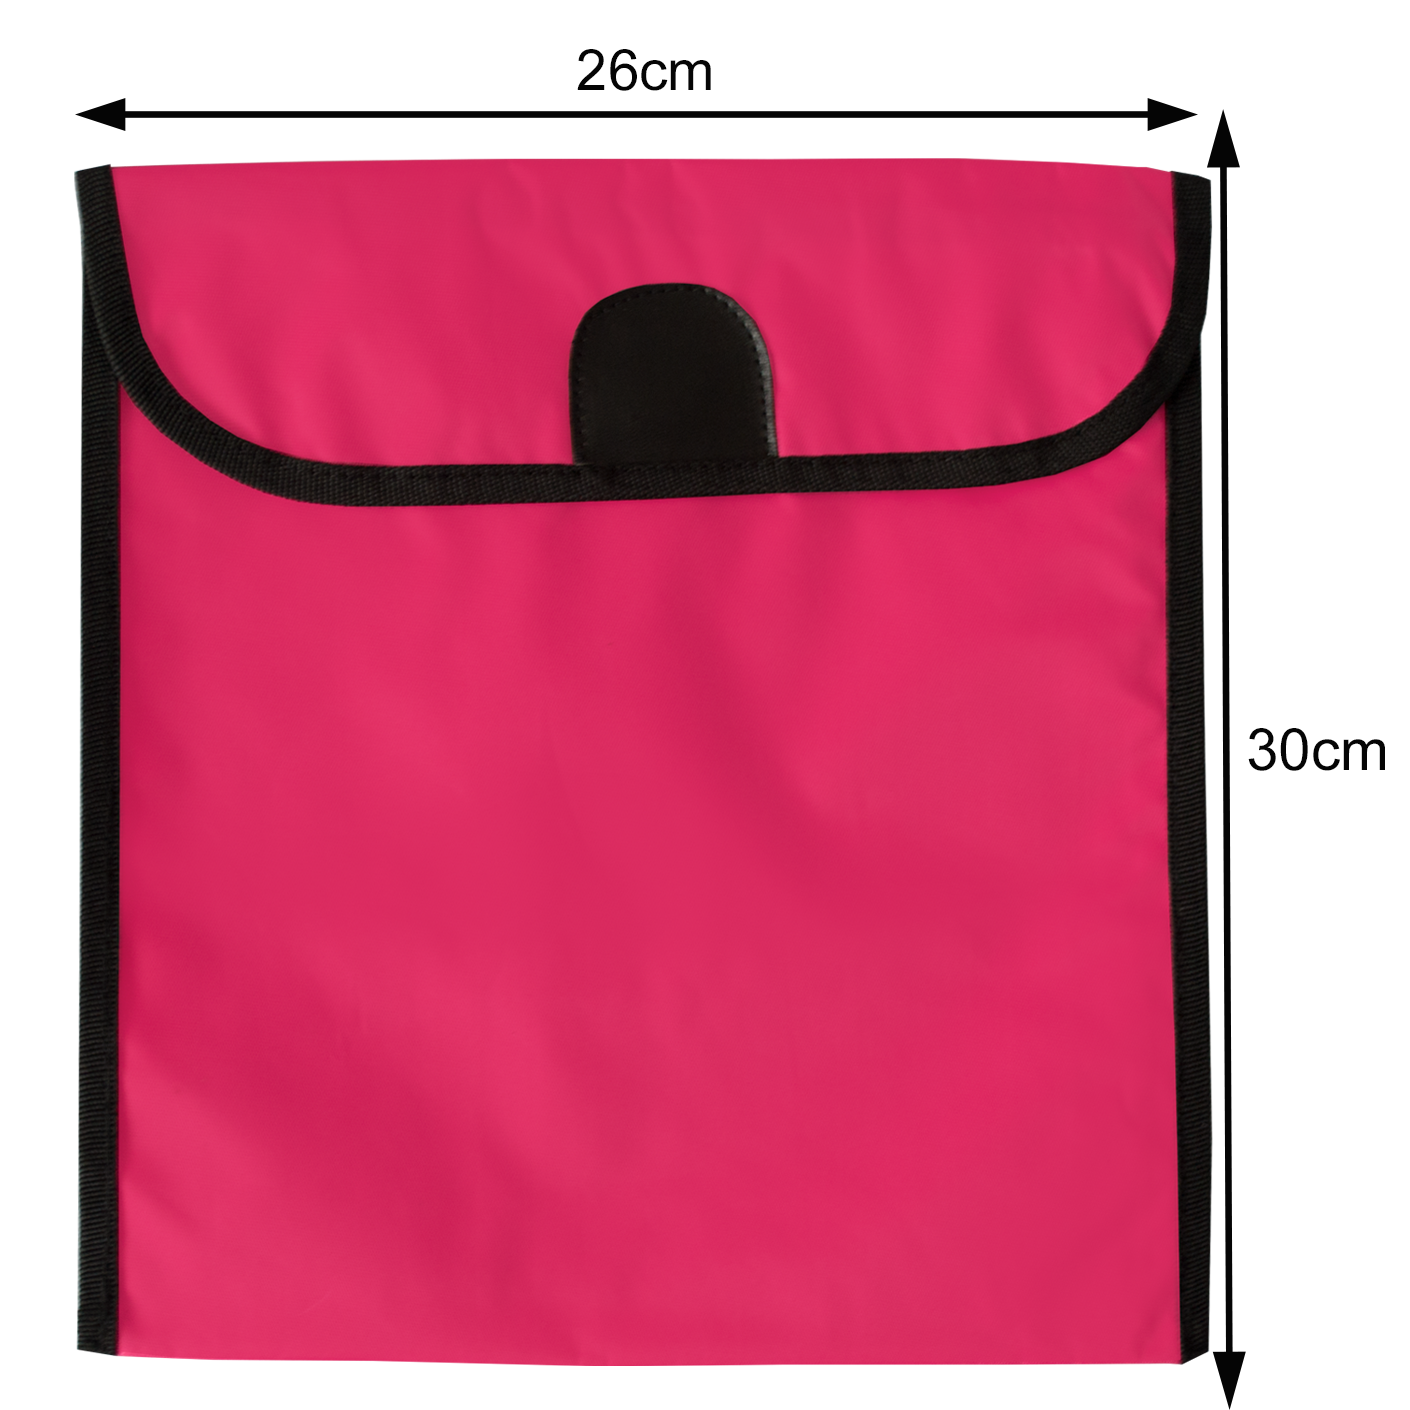 Book Bag Small 26 x 30cm Pink